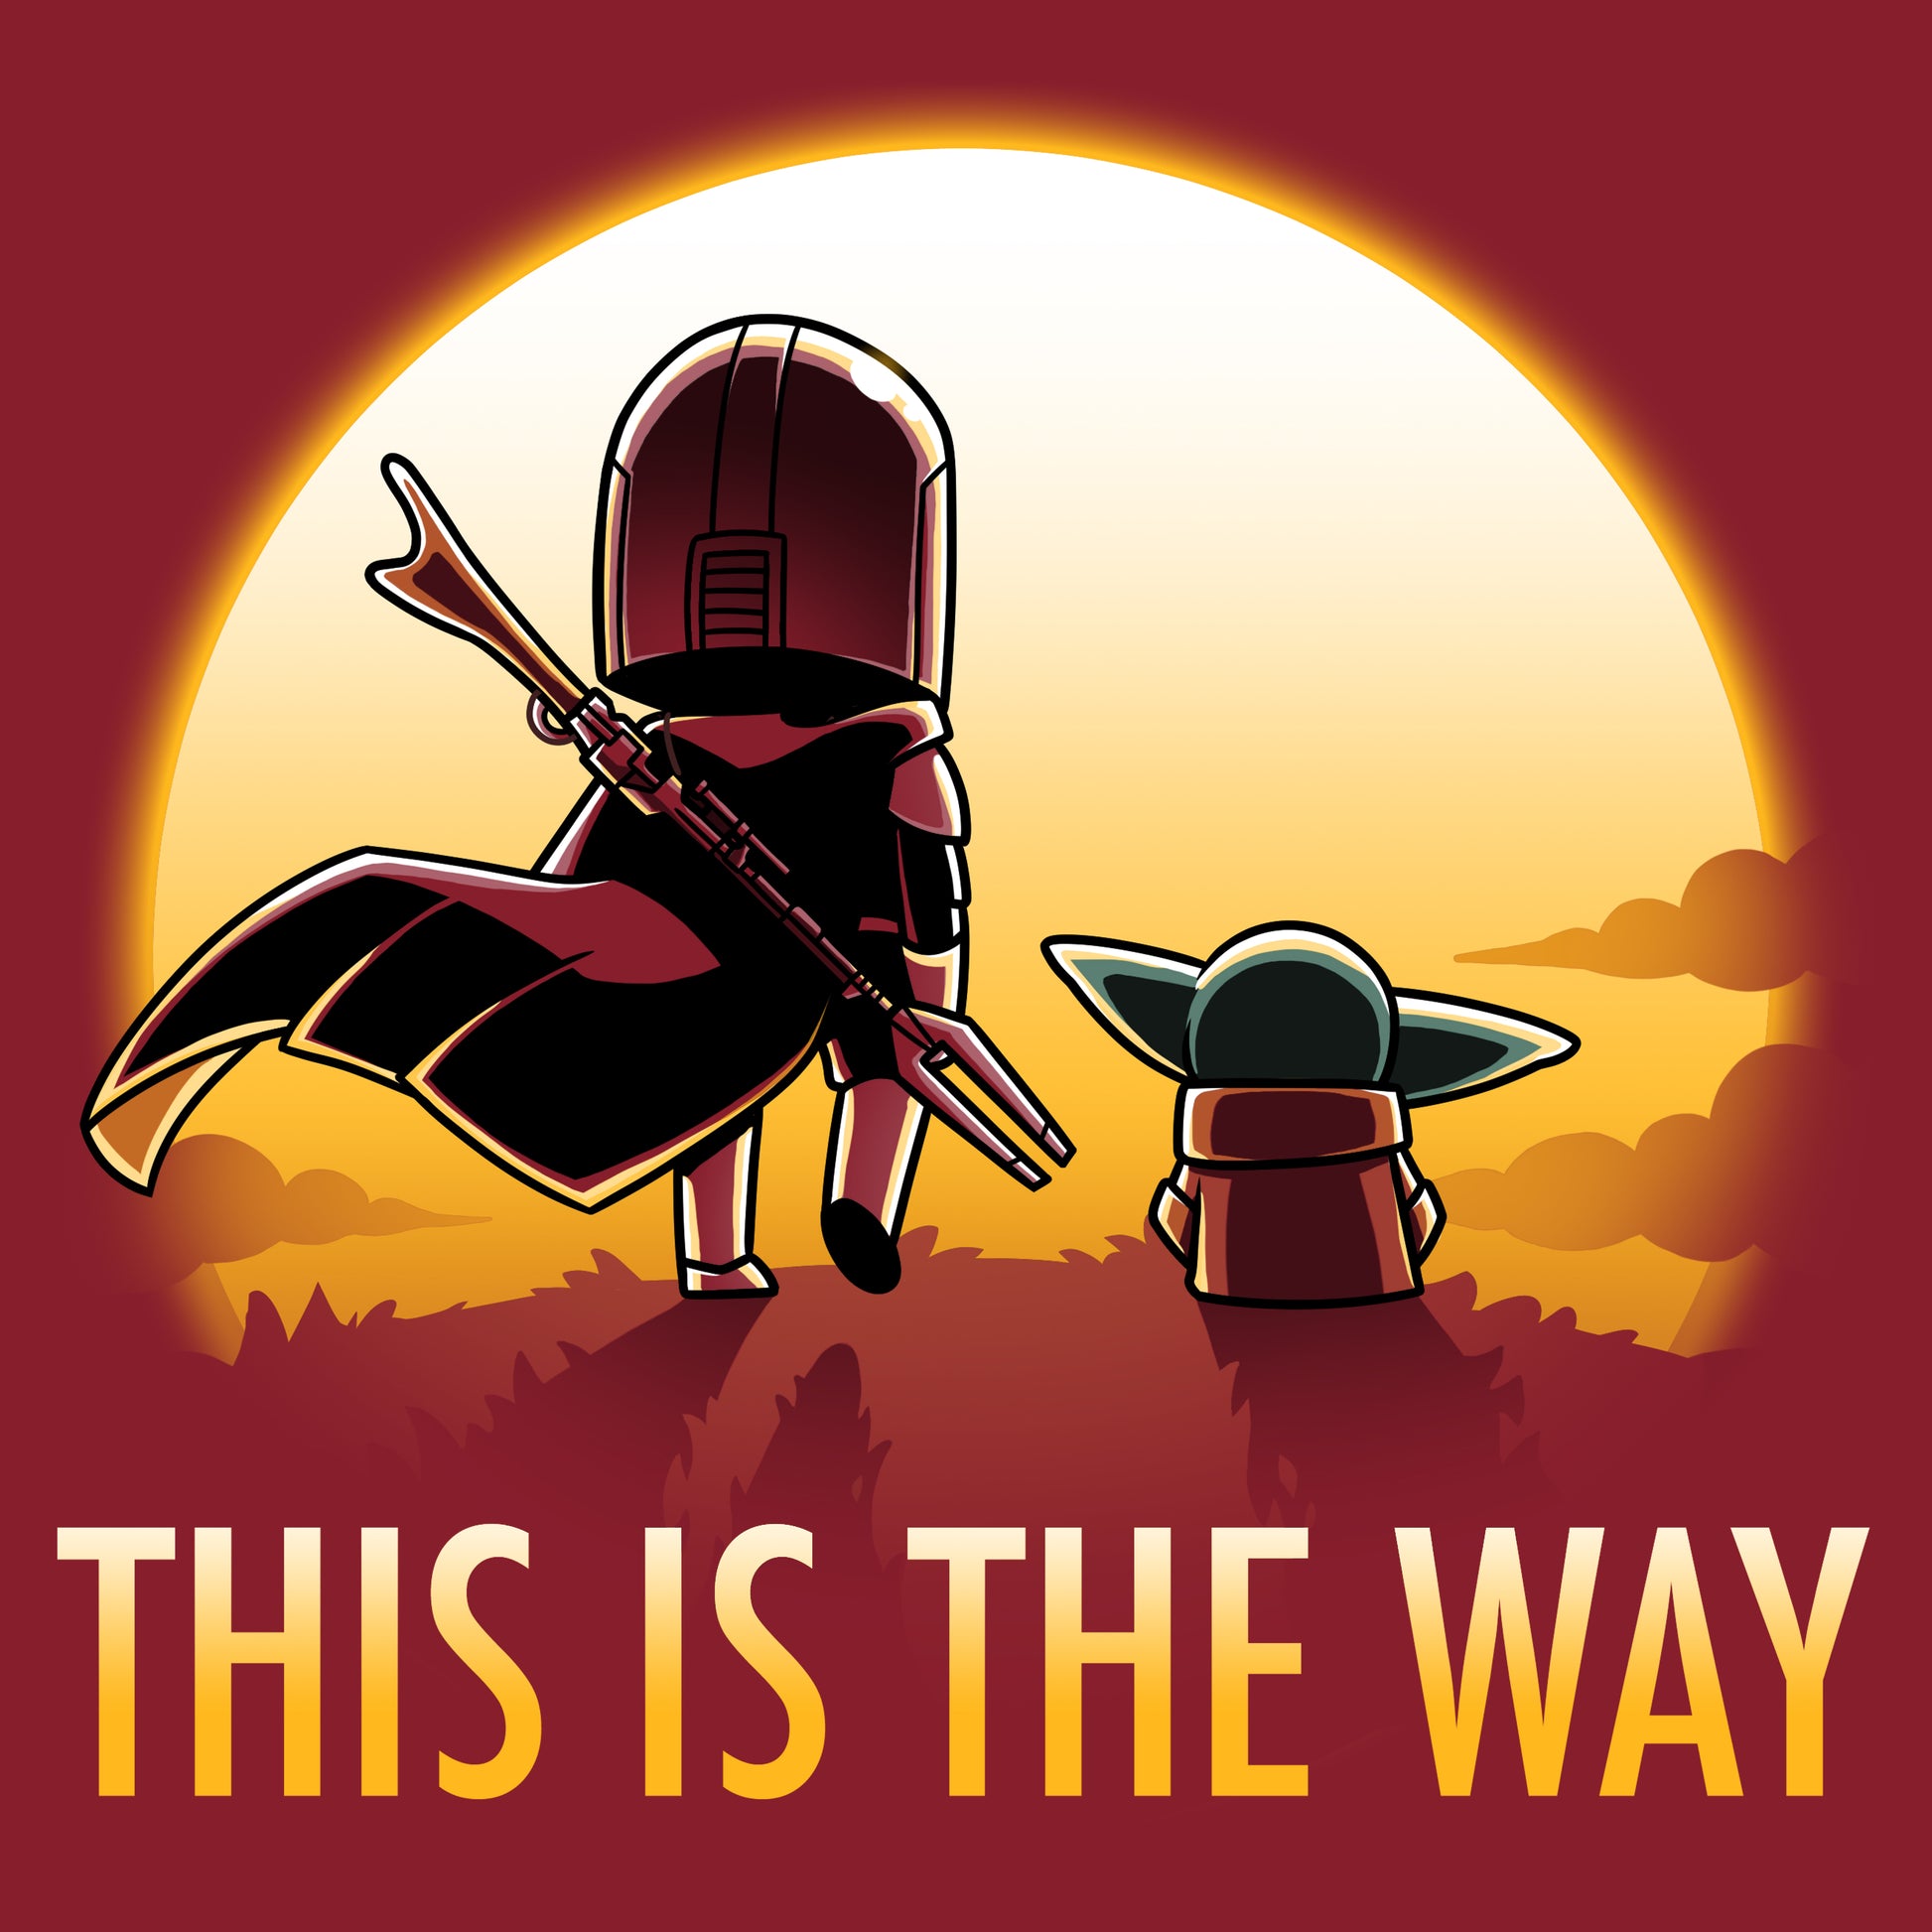 Officially Licensed Star Wars tee featuring the iconic Mando and Grogu with the product name "This is the Way (Sunset)" for the ages.